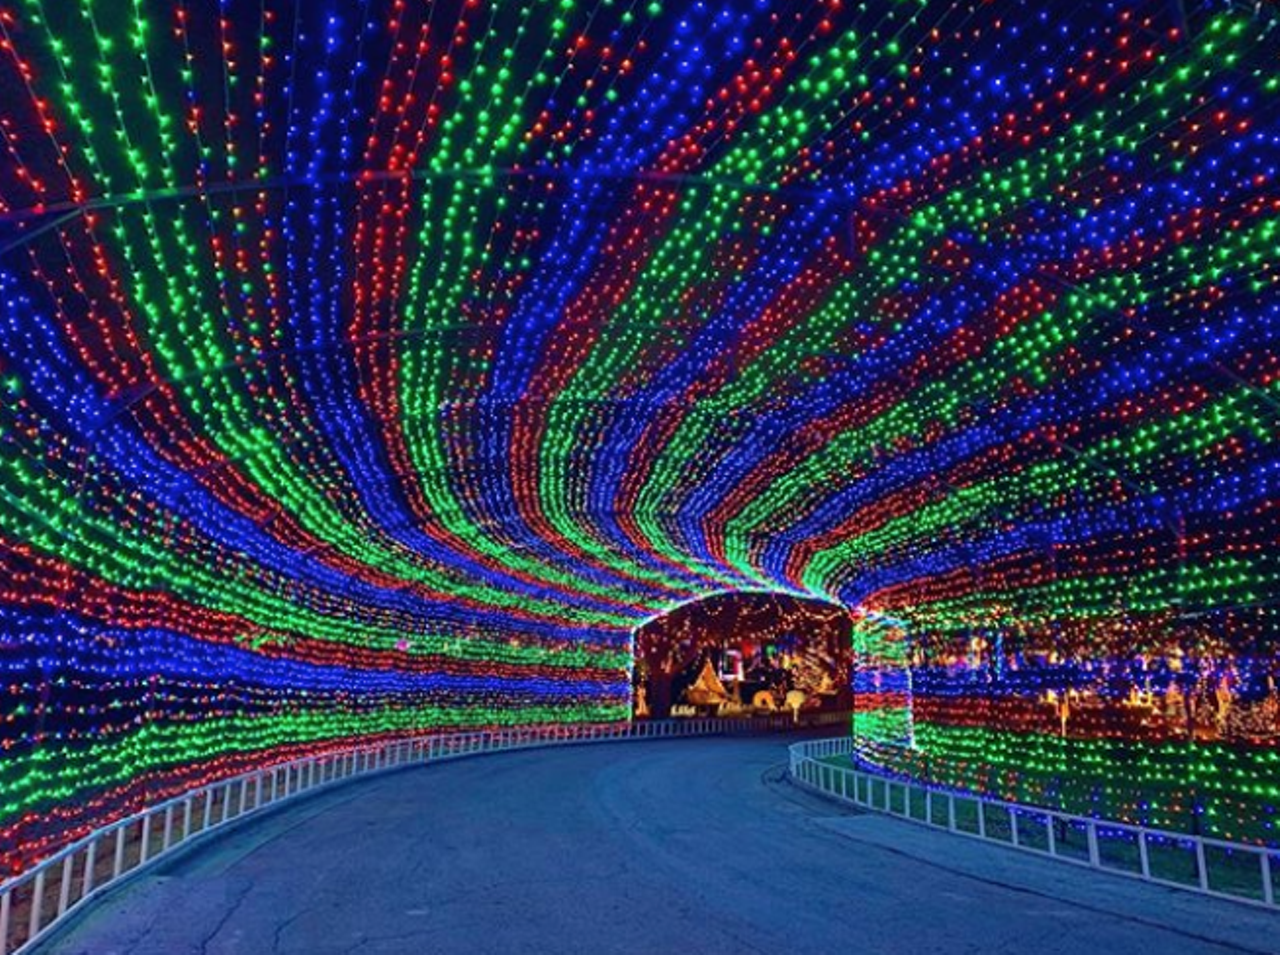 Trail of Lights
2400 Barton Springs Road, Austin, austintrailoflights.org
From November 28 through January 3, San Antonians can make the trip up to Austin to hit up the famed Trail of Lights. The display, back for a 56th year (!), brings more than 400,000 visitors each year to take in the 40+ displays and more than 2 million lights — this time as a drive-through experience. Though the event has featured amusement rides and concessions in past years, this year they are not available. You are, however, allowed to bring food and non-alcoholic drinks to enjoy in your vehicle.
Photo via Instagram / atxlights